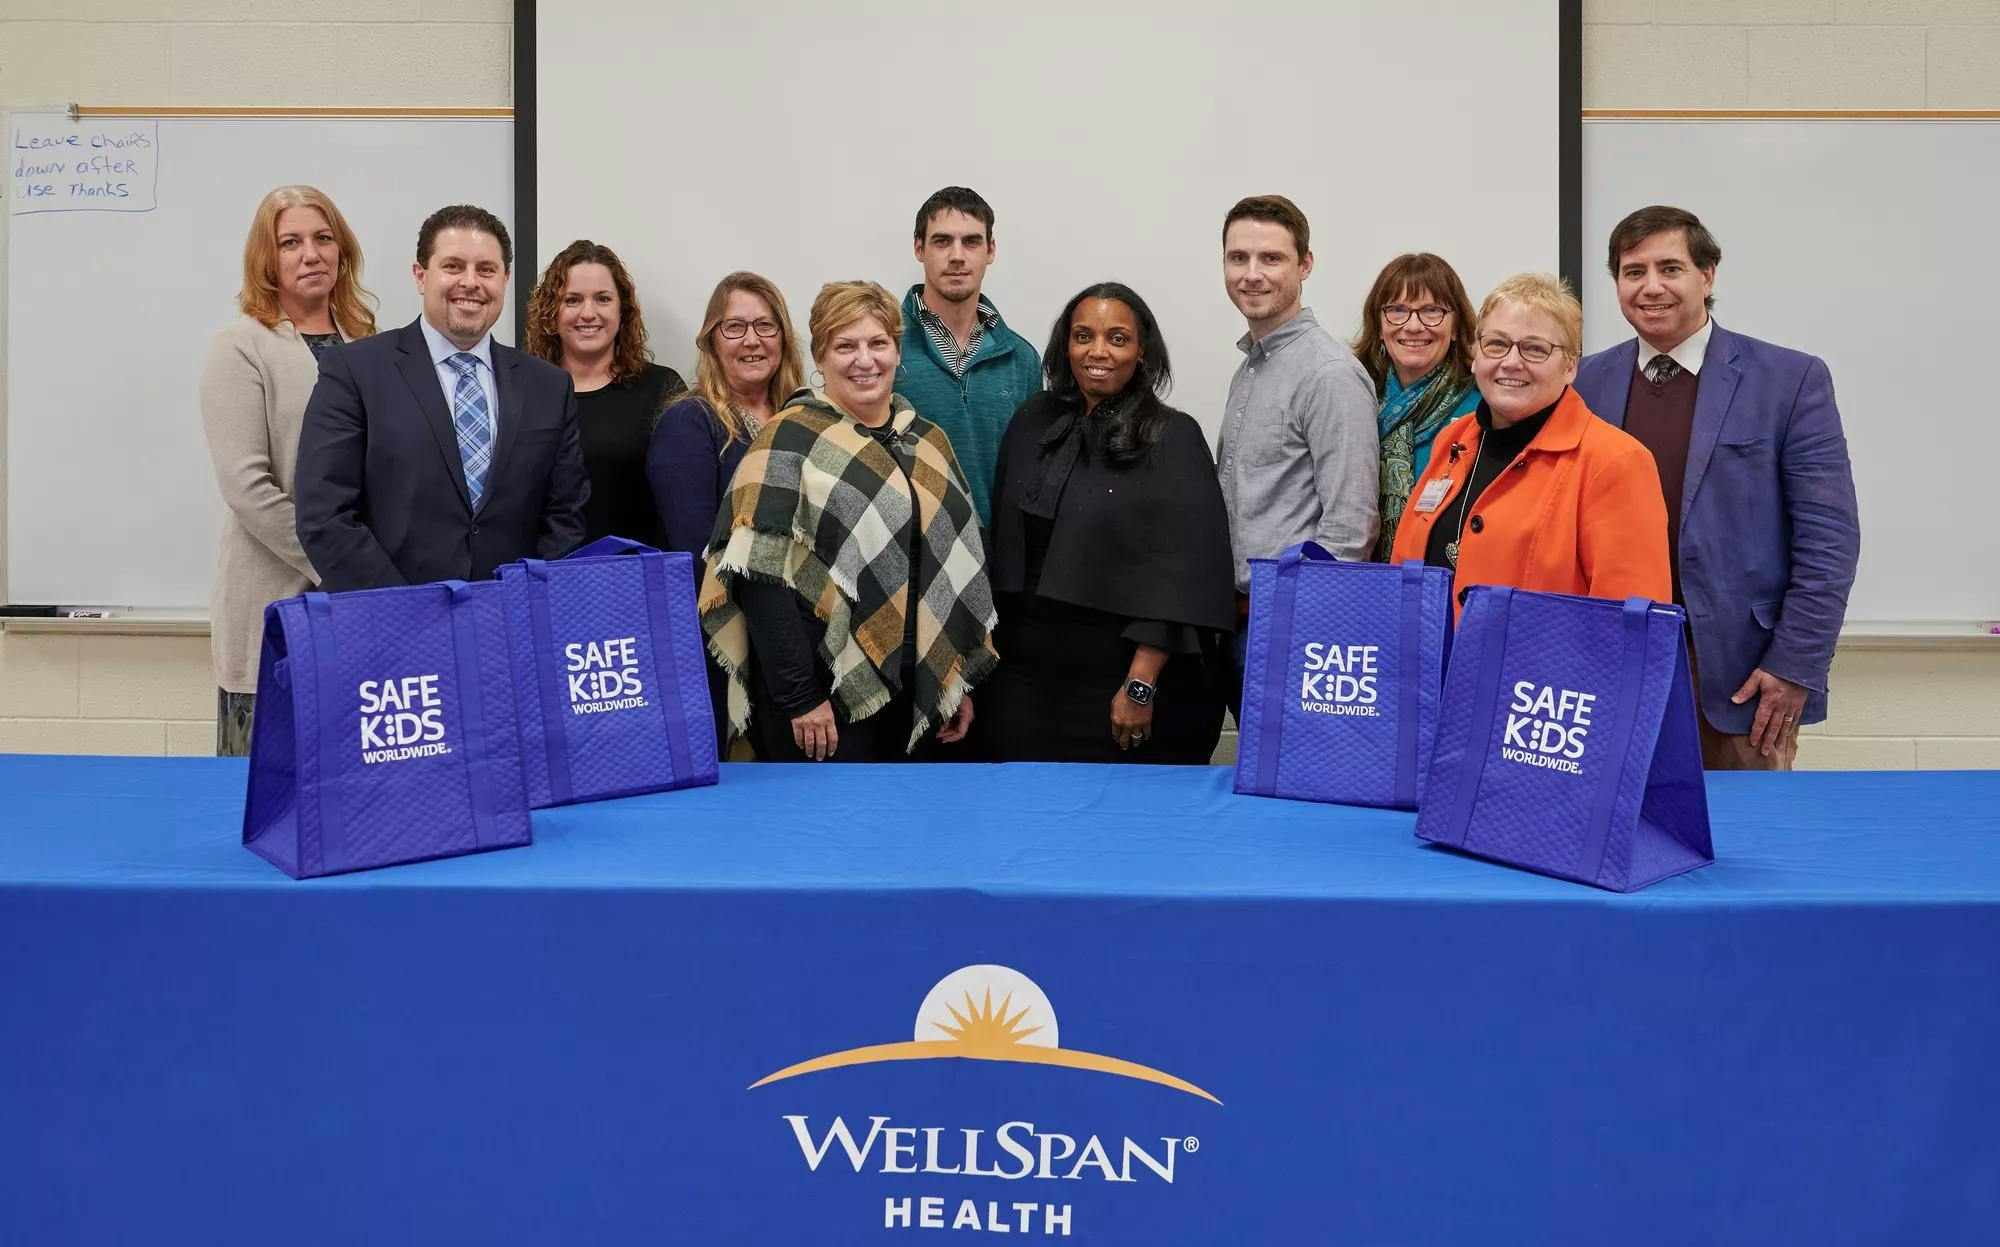 Photos from WellSpan Community Health event for Safe Kids South Central PA Kick Off Event at Adams county department of emergency services and training facility, Gettysburg.

Left to right:
Nickie Fickle, Mike Cogliano, Jen Gustey, Alice Price, Carolyn Clouser(Fist Start), Kameron Ammacos(Adams County Children and Youth), Torrine Creppy(Safe Kids), Marck Chandler(Safe Kids), Joanne Ward-Cottrell, Ann Kunkle, Dr. Chris Russo.